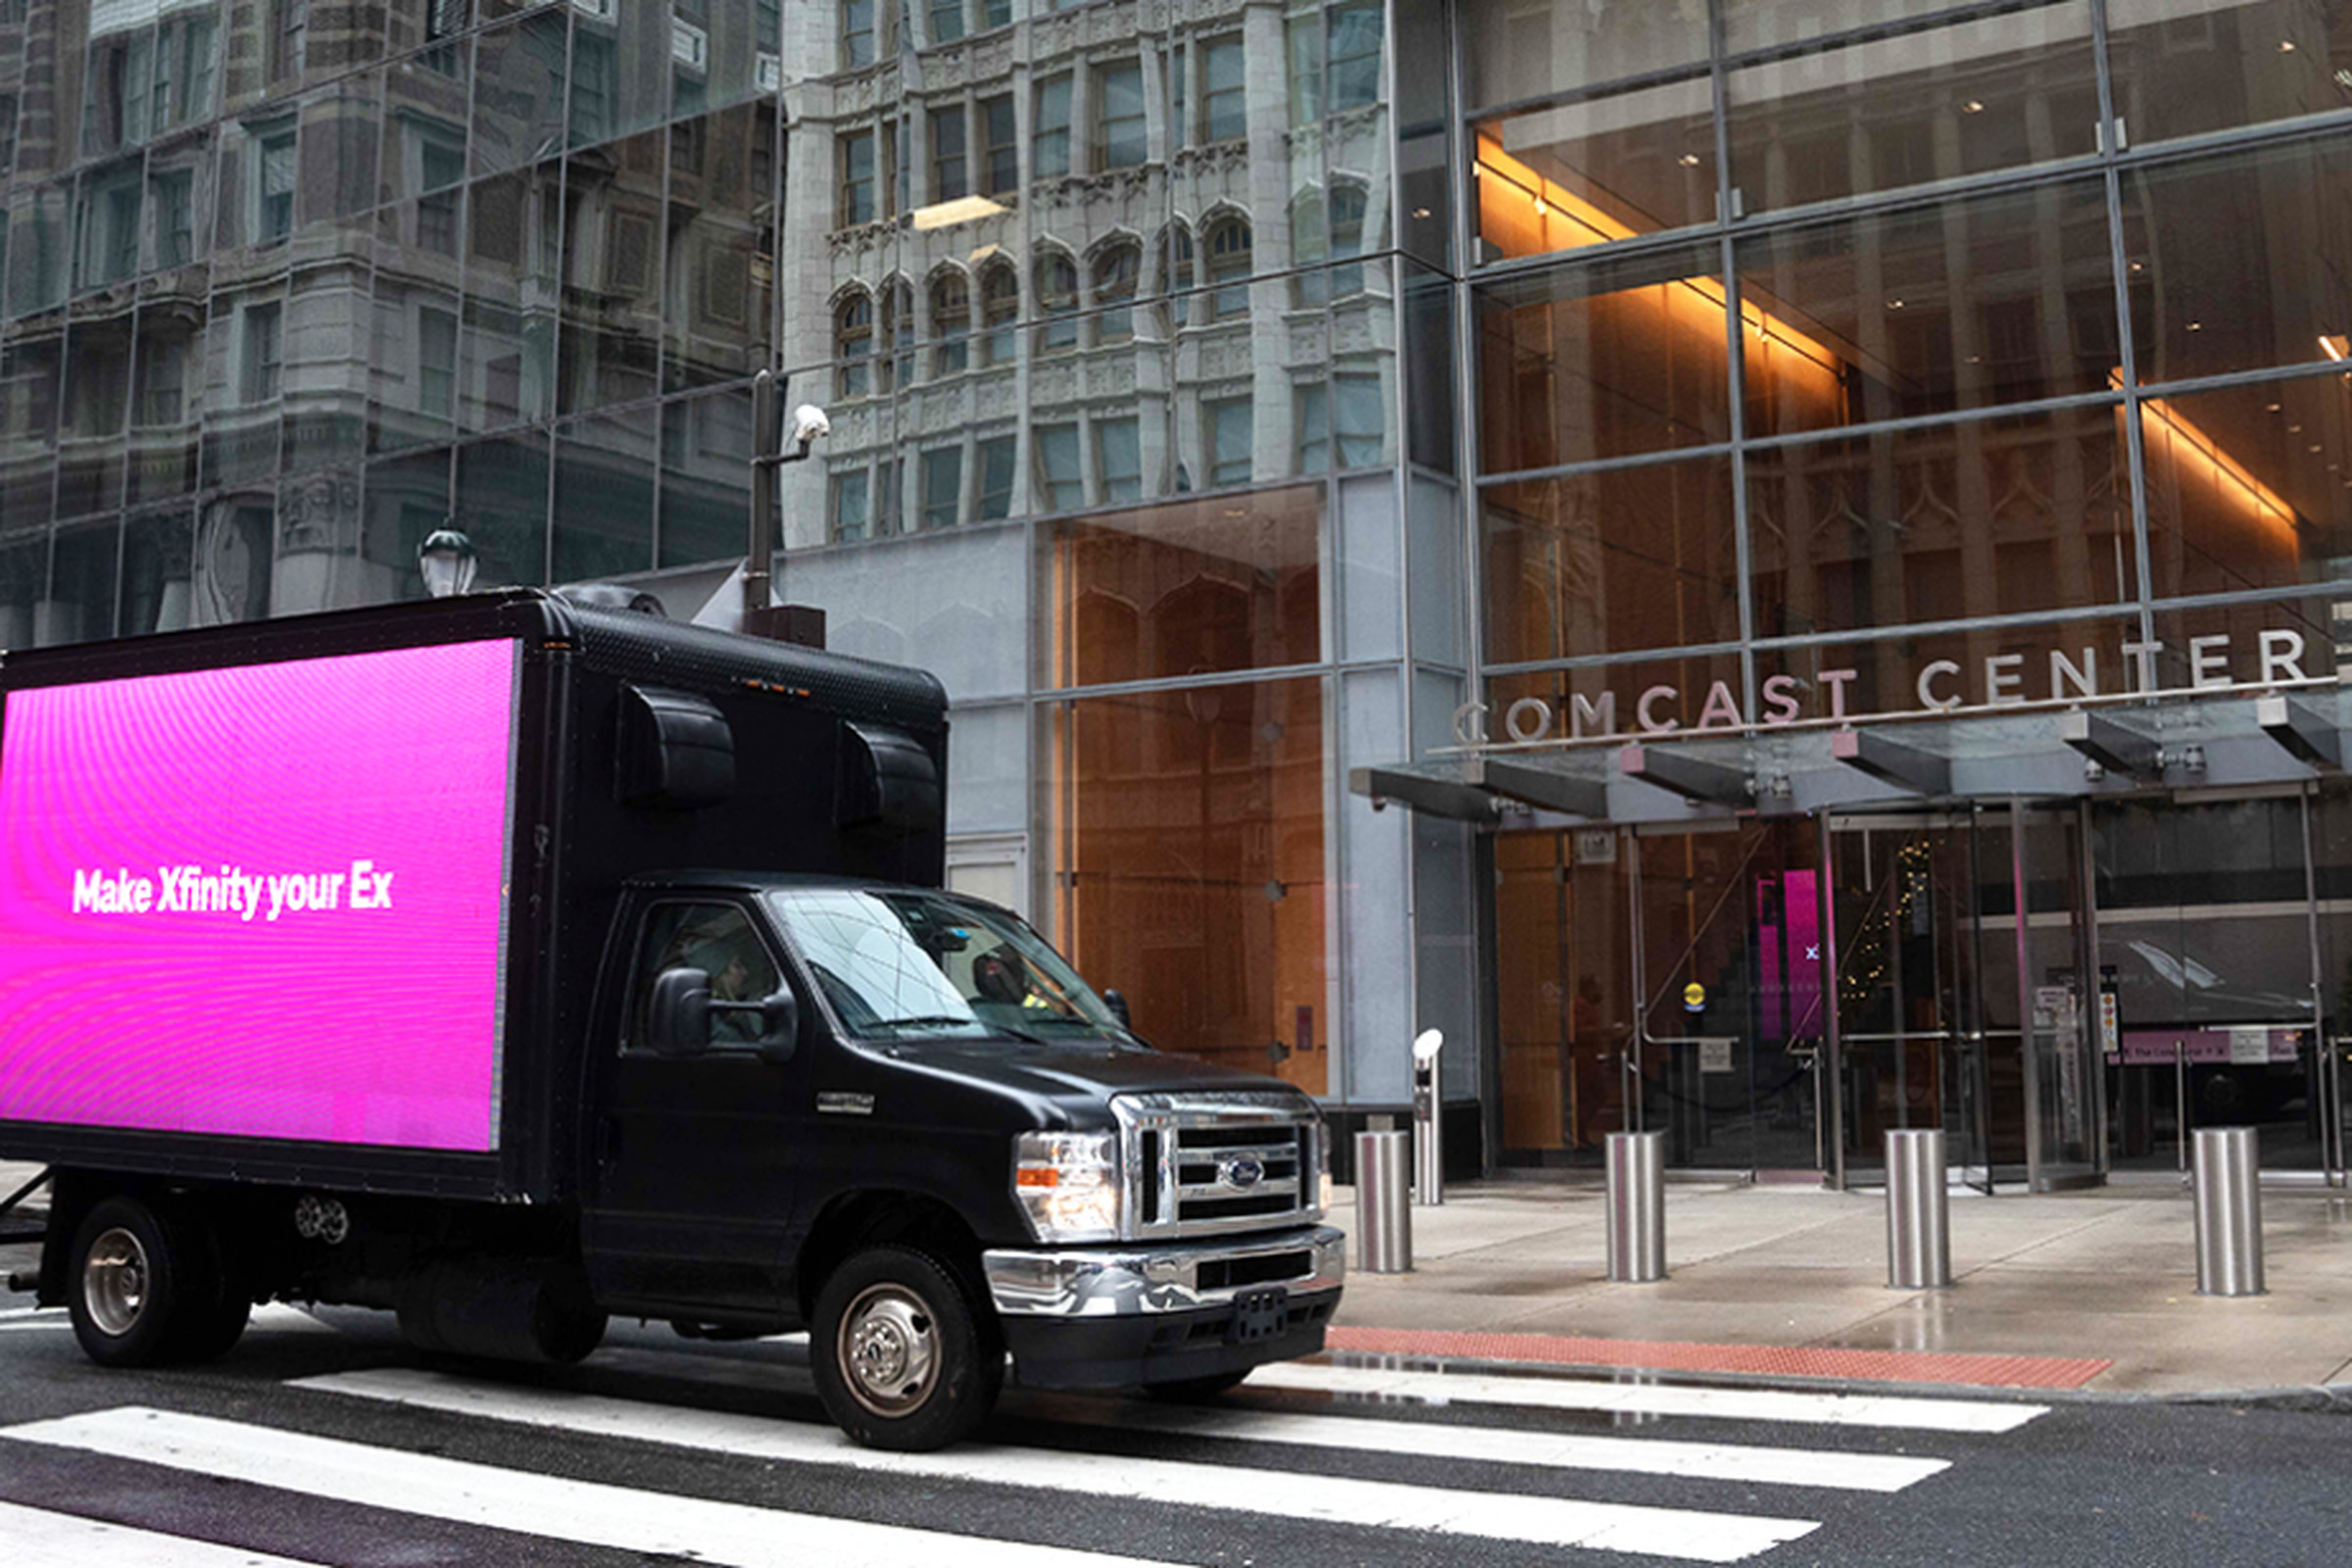 Photo of a T-Mobile billboard on a truck outside of Comcast Center. The billboard reads “Make Xfinity your ex”